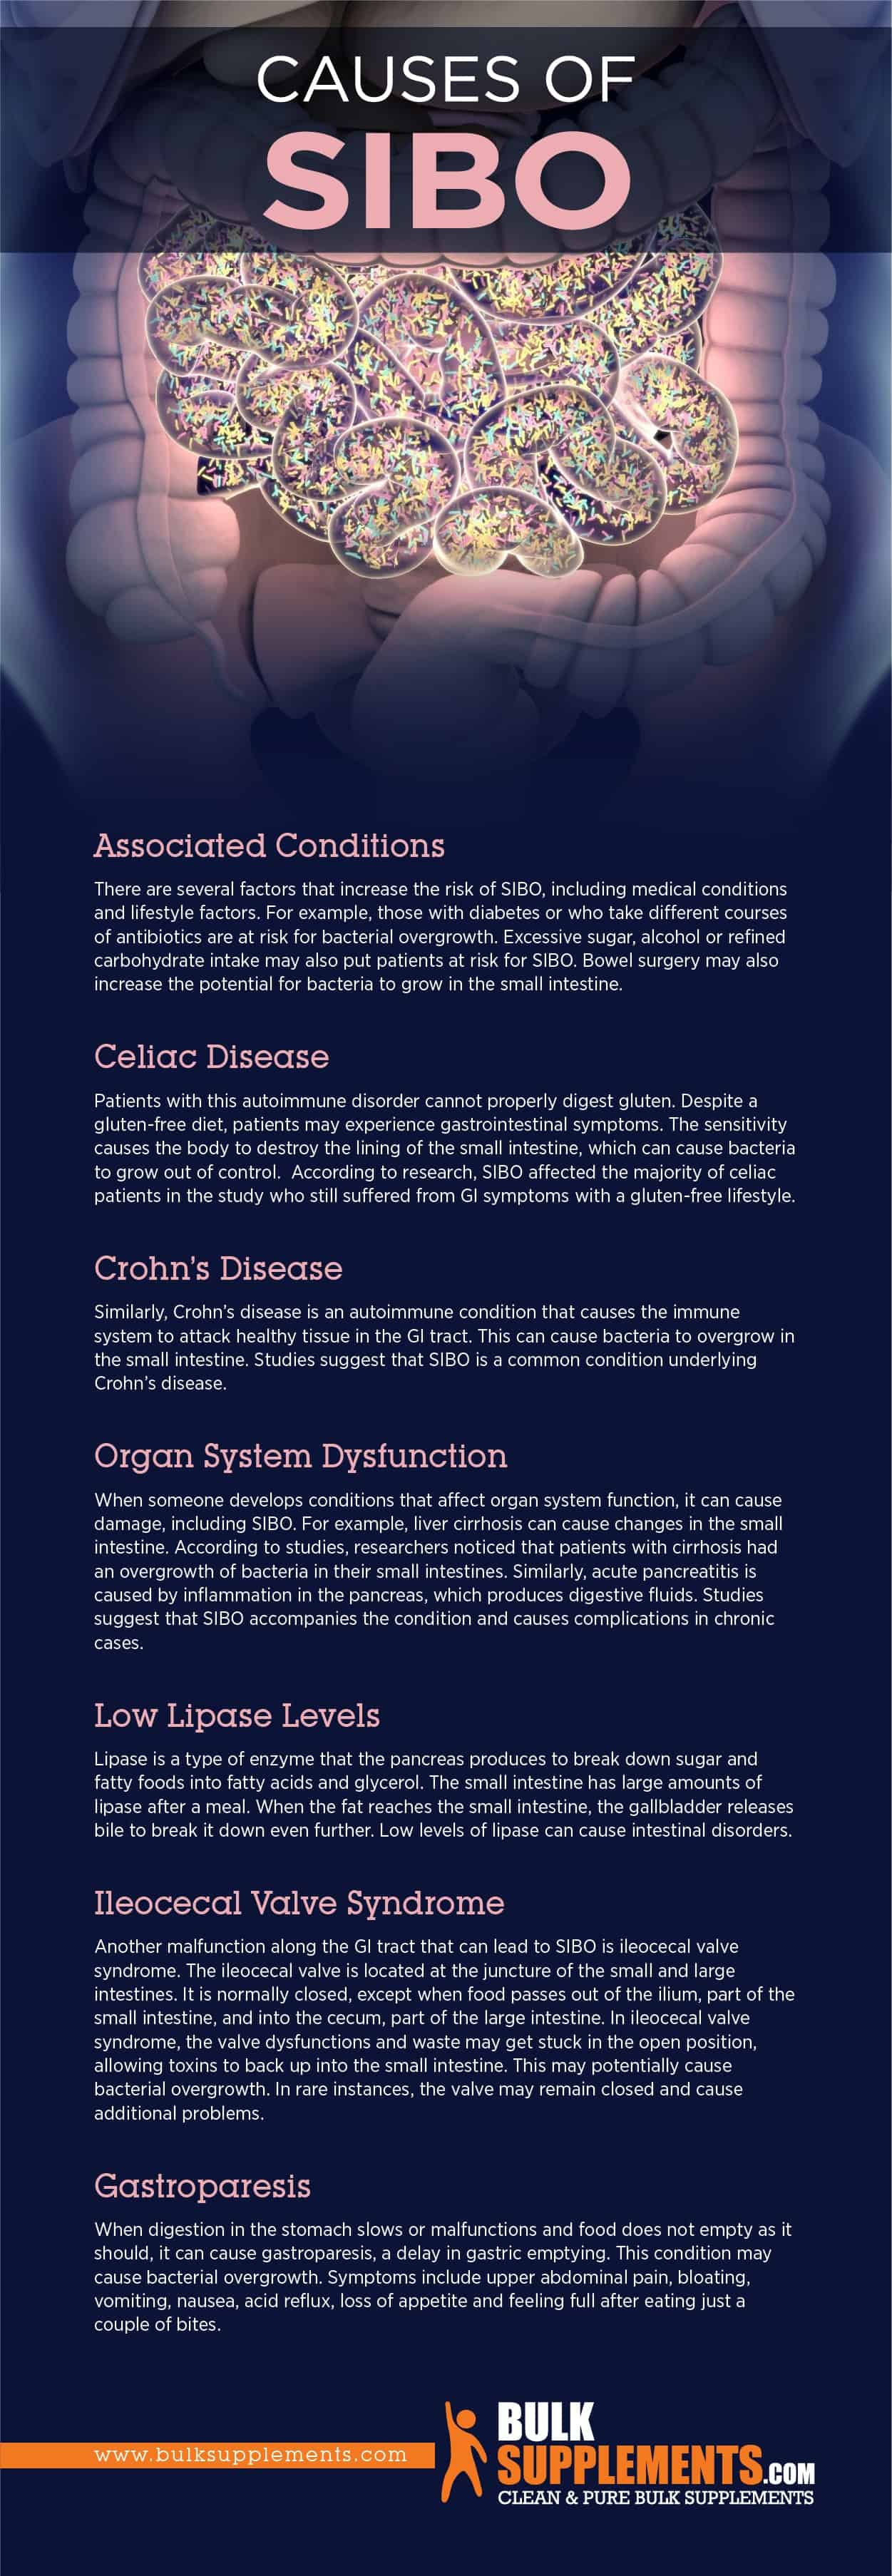 Causes of SIBO